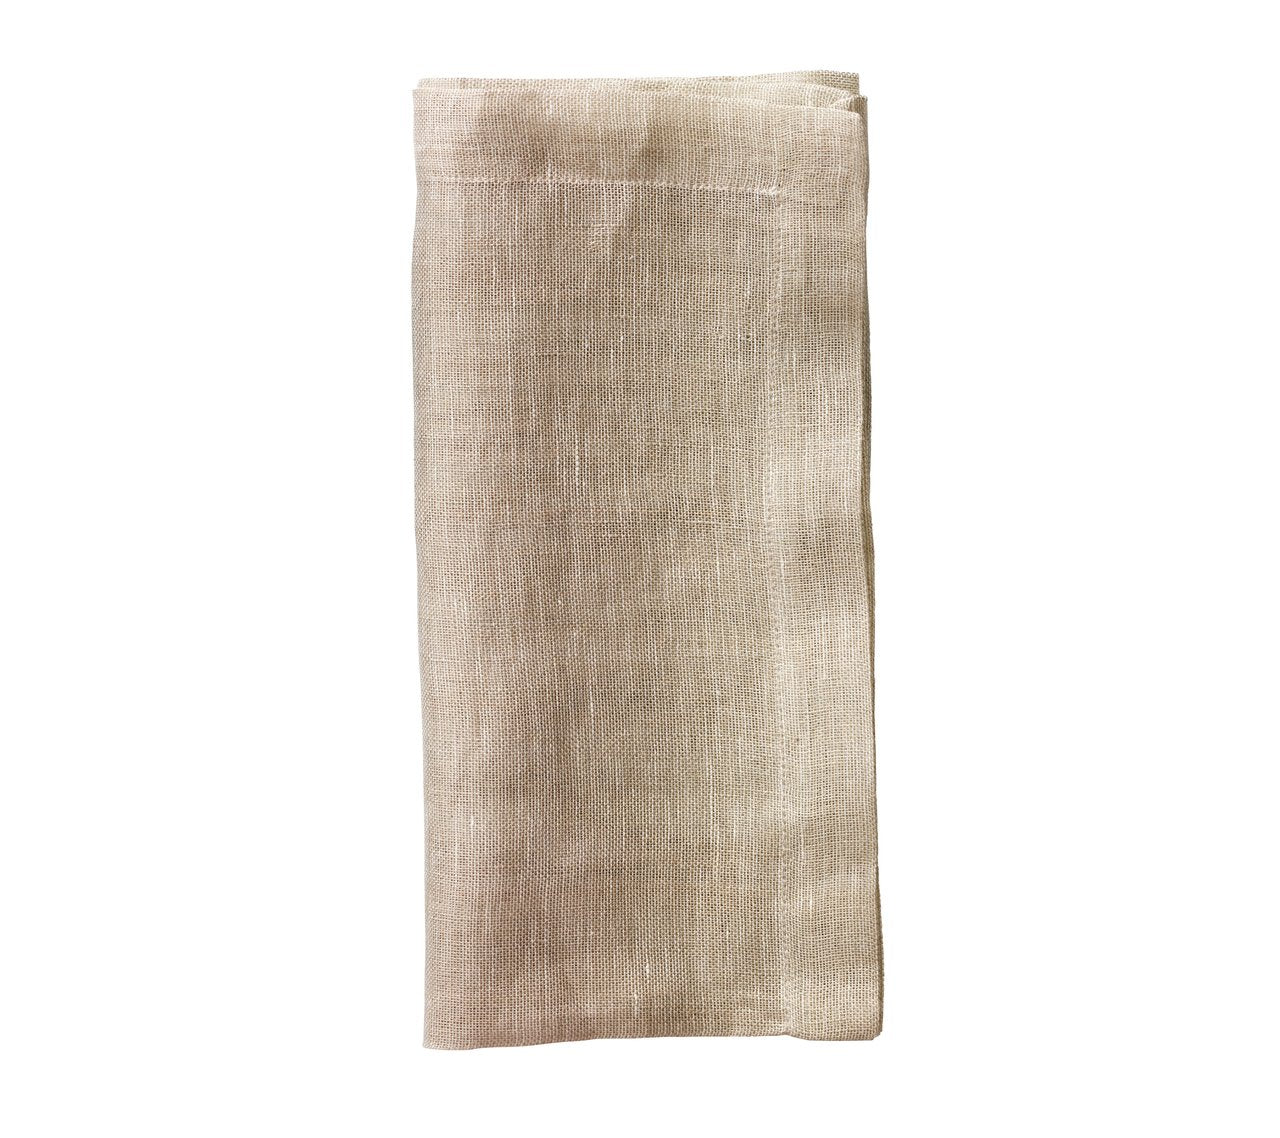 CHAMBRAY GAUZE NAPKINS IN NATURAL - Pioneer Linens